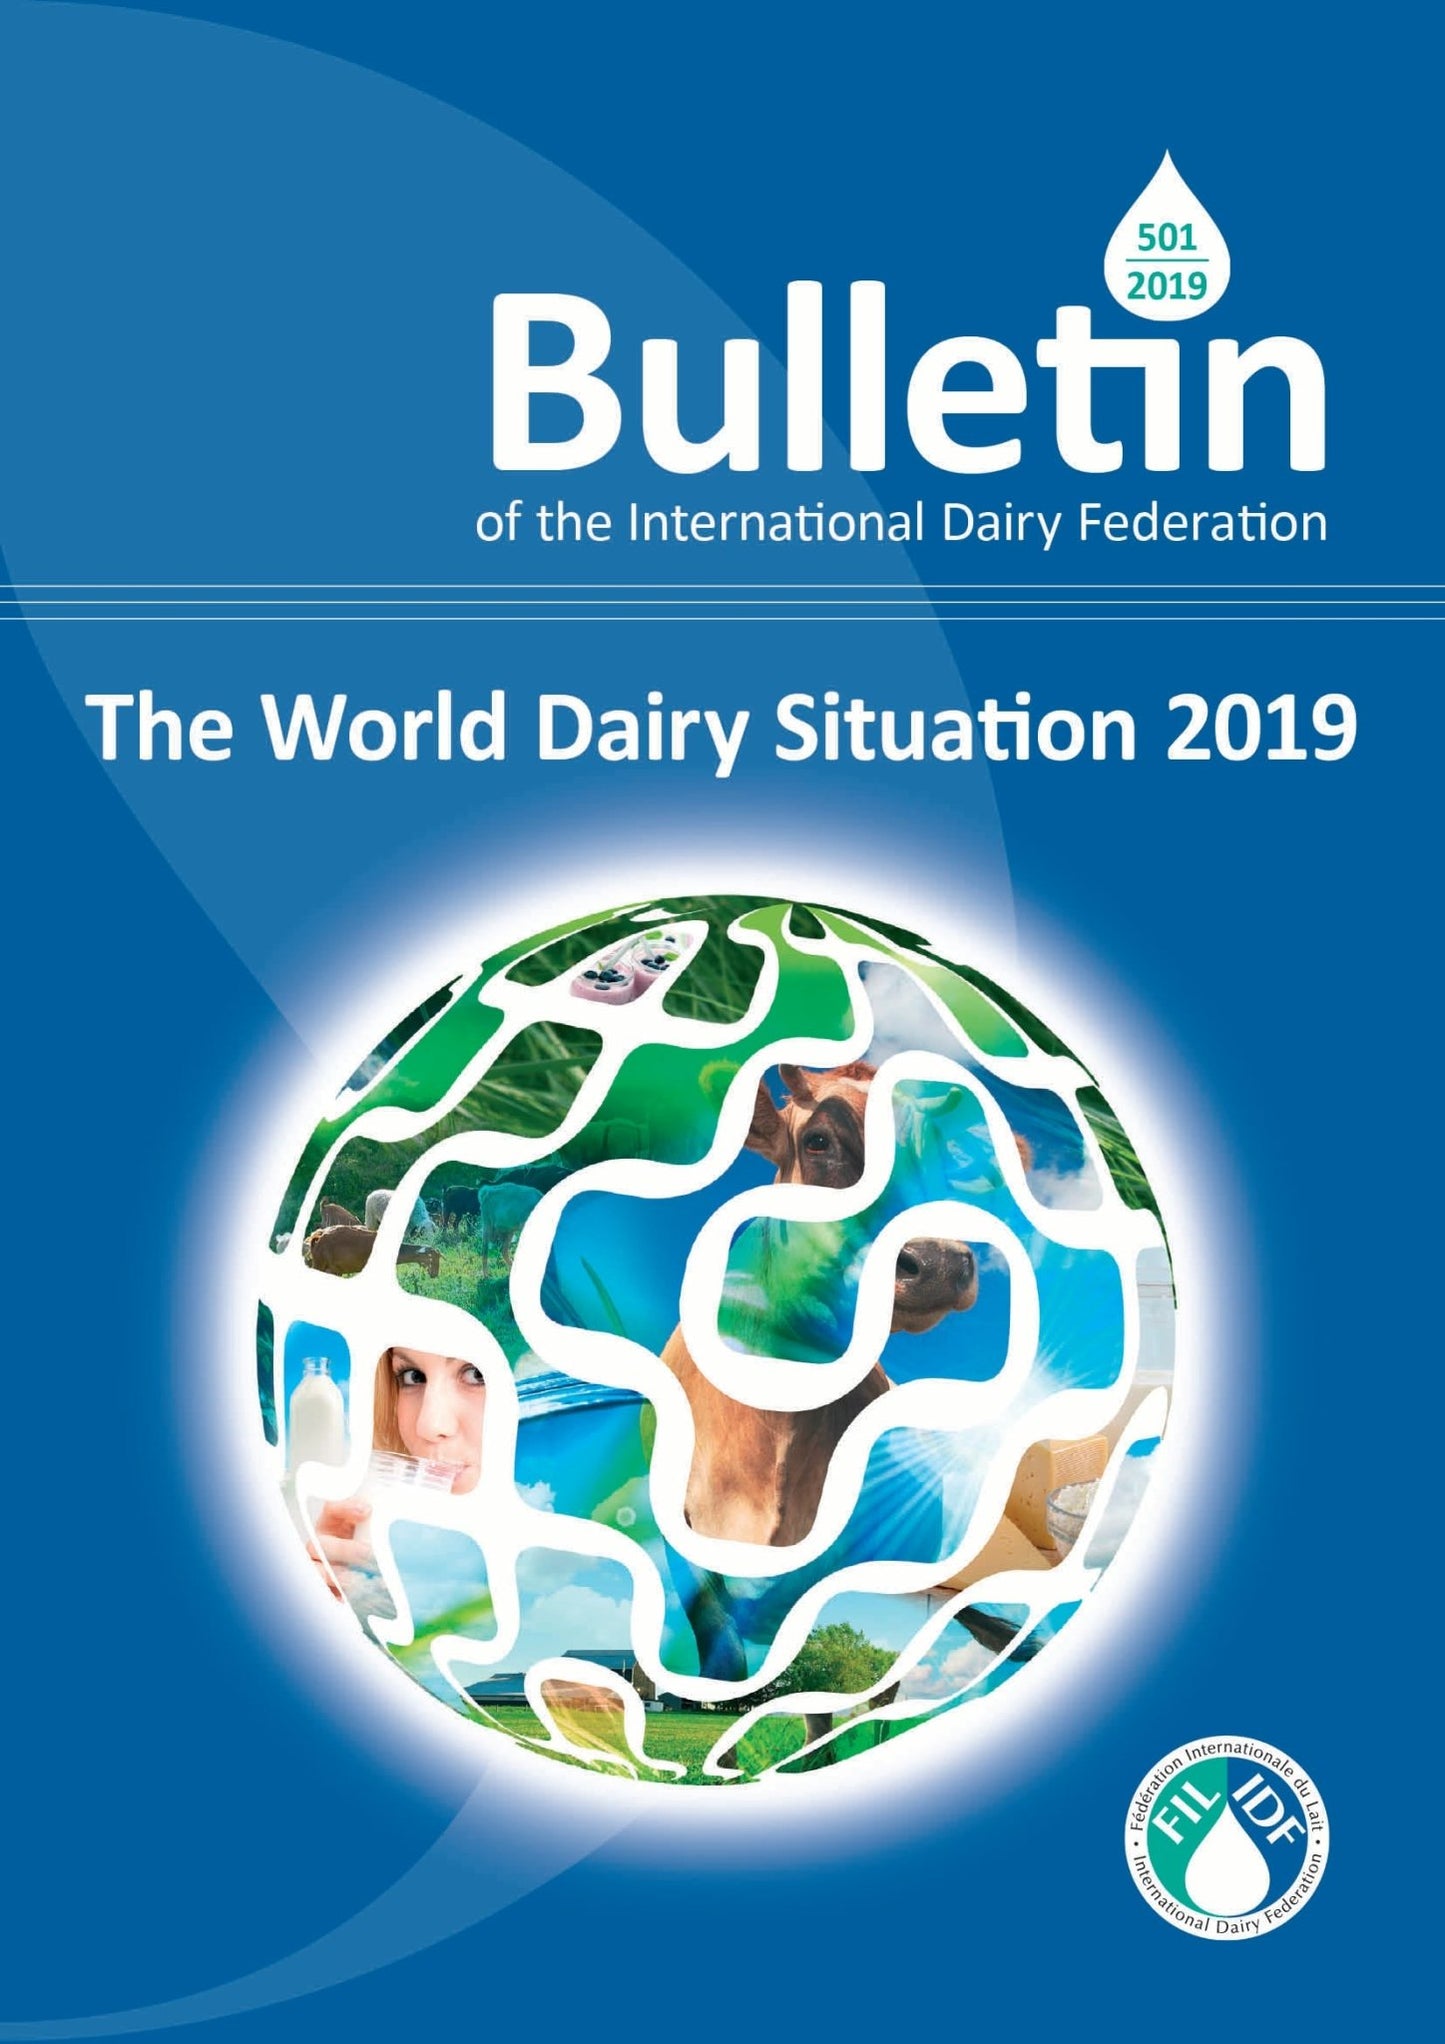 Bulletin of the IDF N° 501/2019: The World Dairy Situation 2019 - FIL-IDF